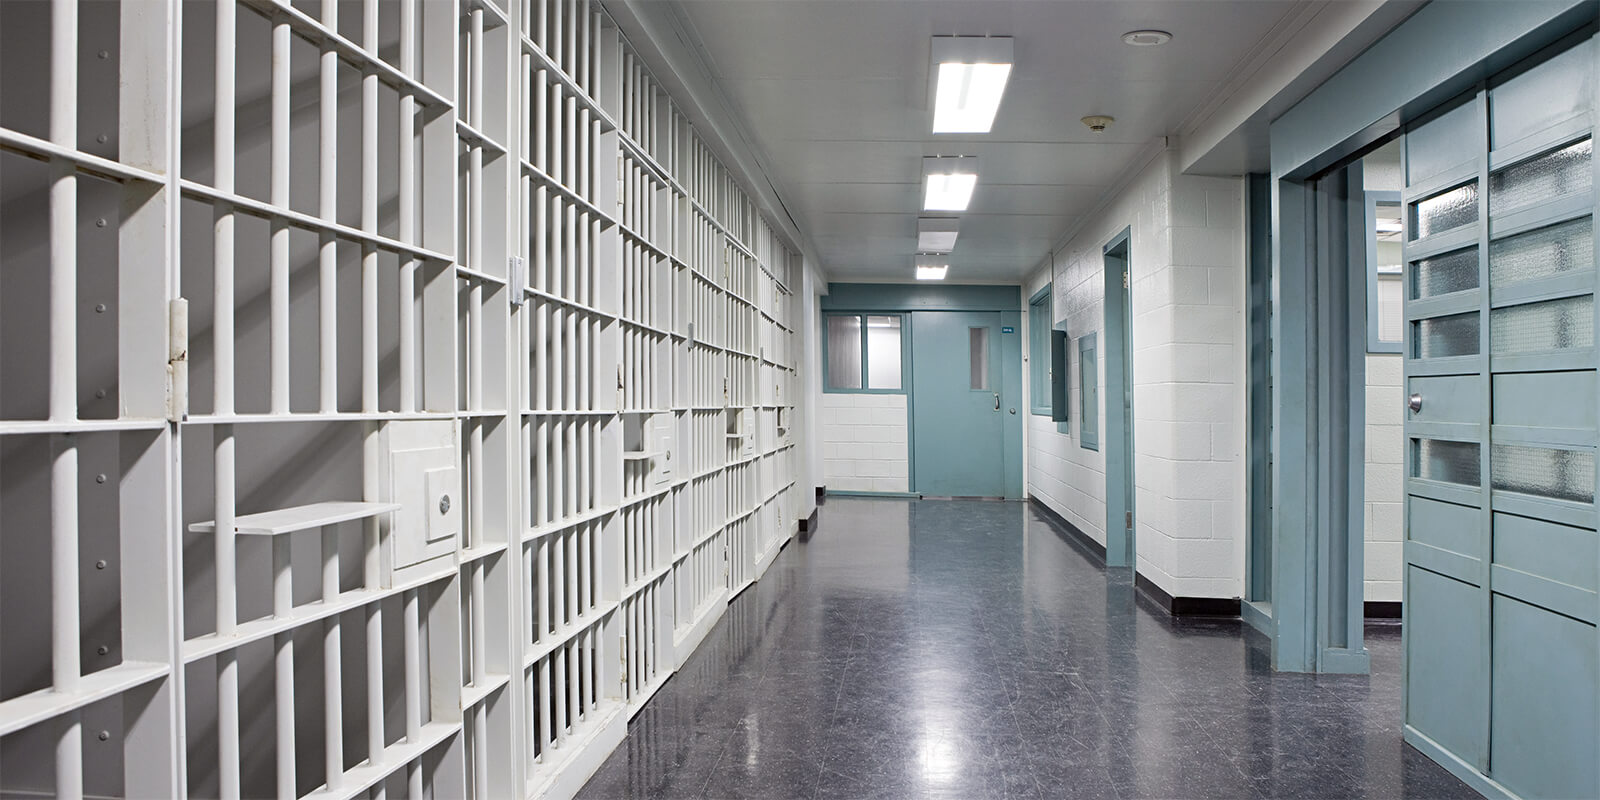 Violent Assaults on Staff Increasing in Illinois Prisons, Youth Centers